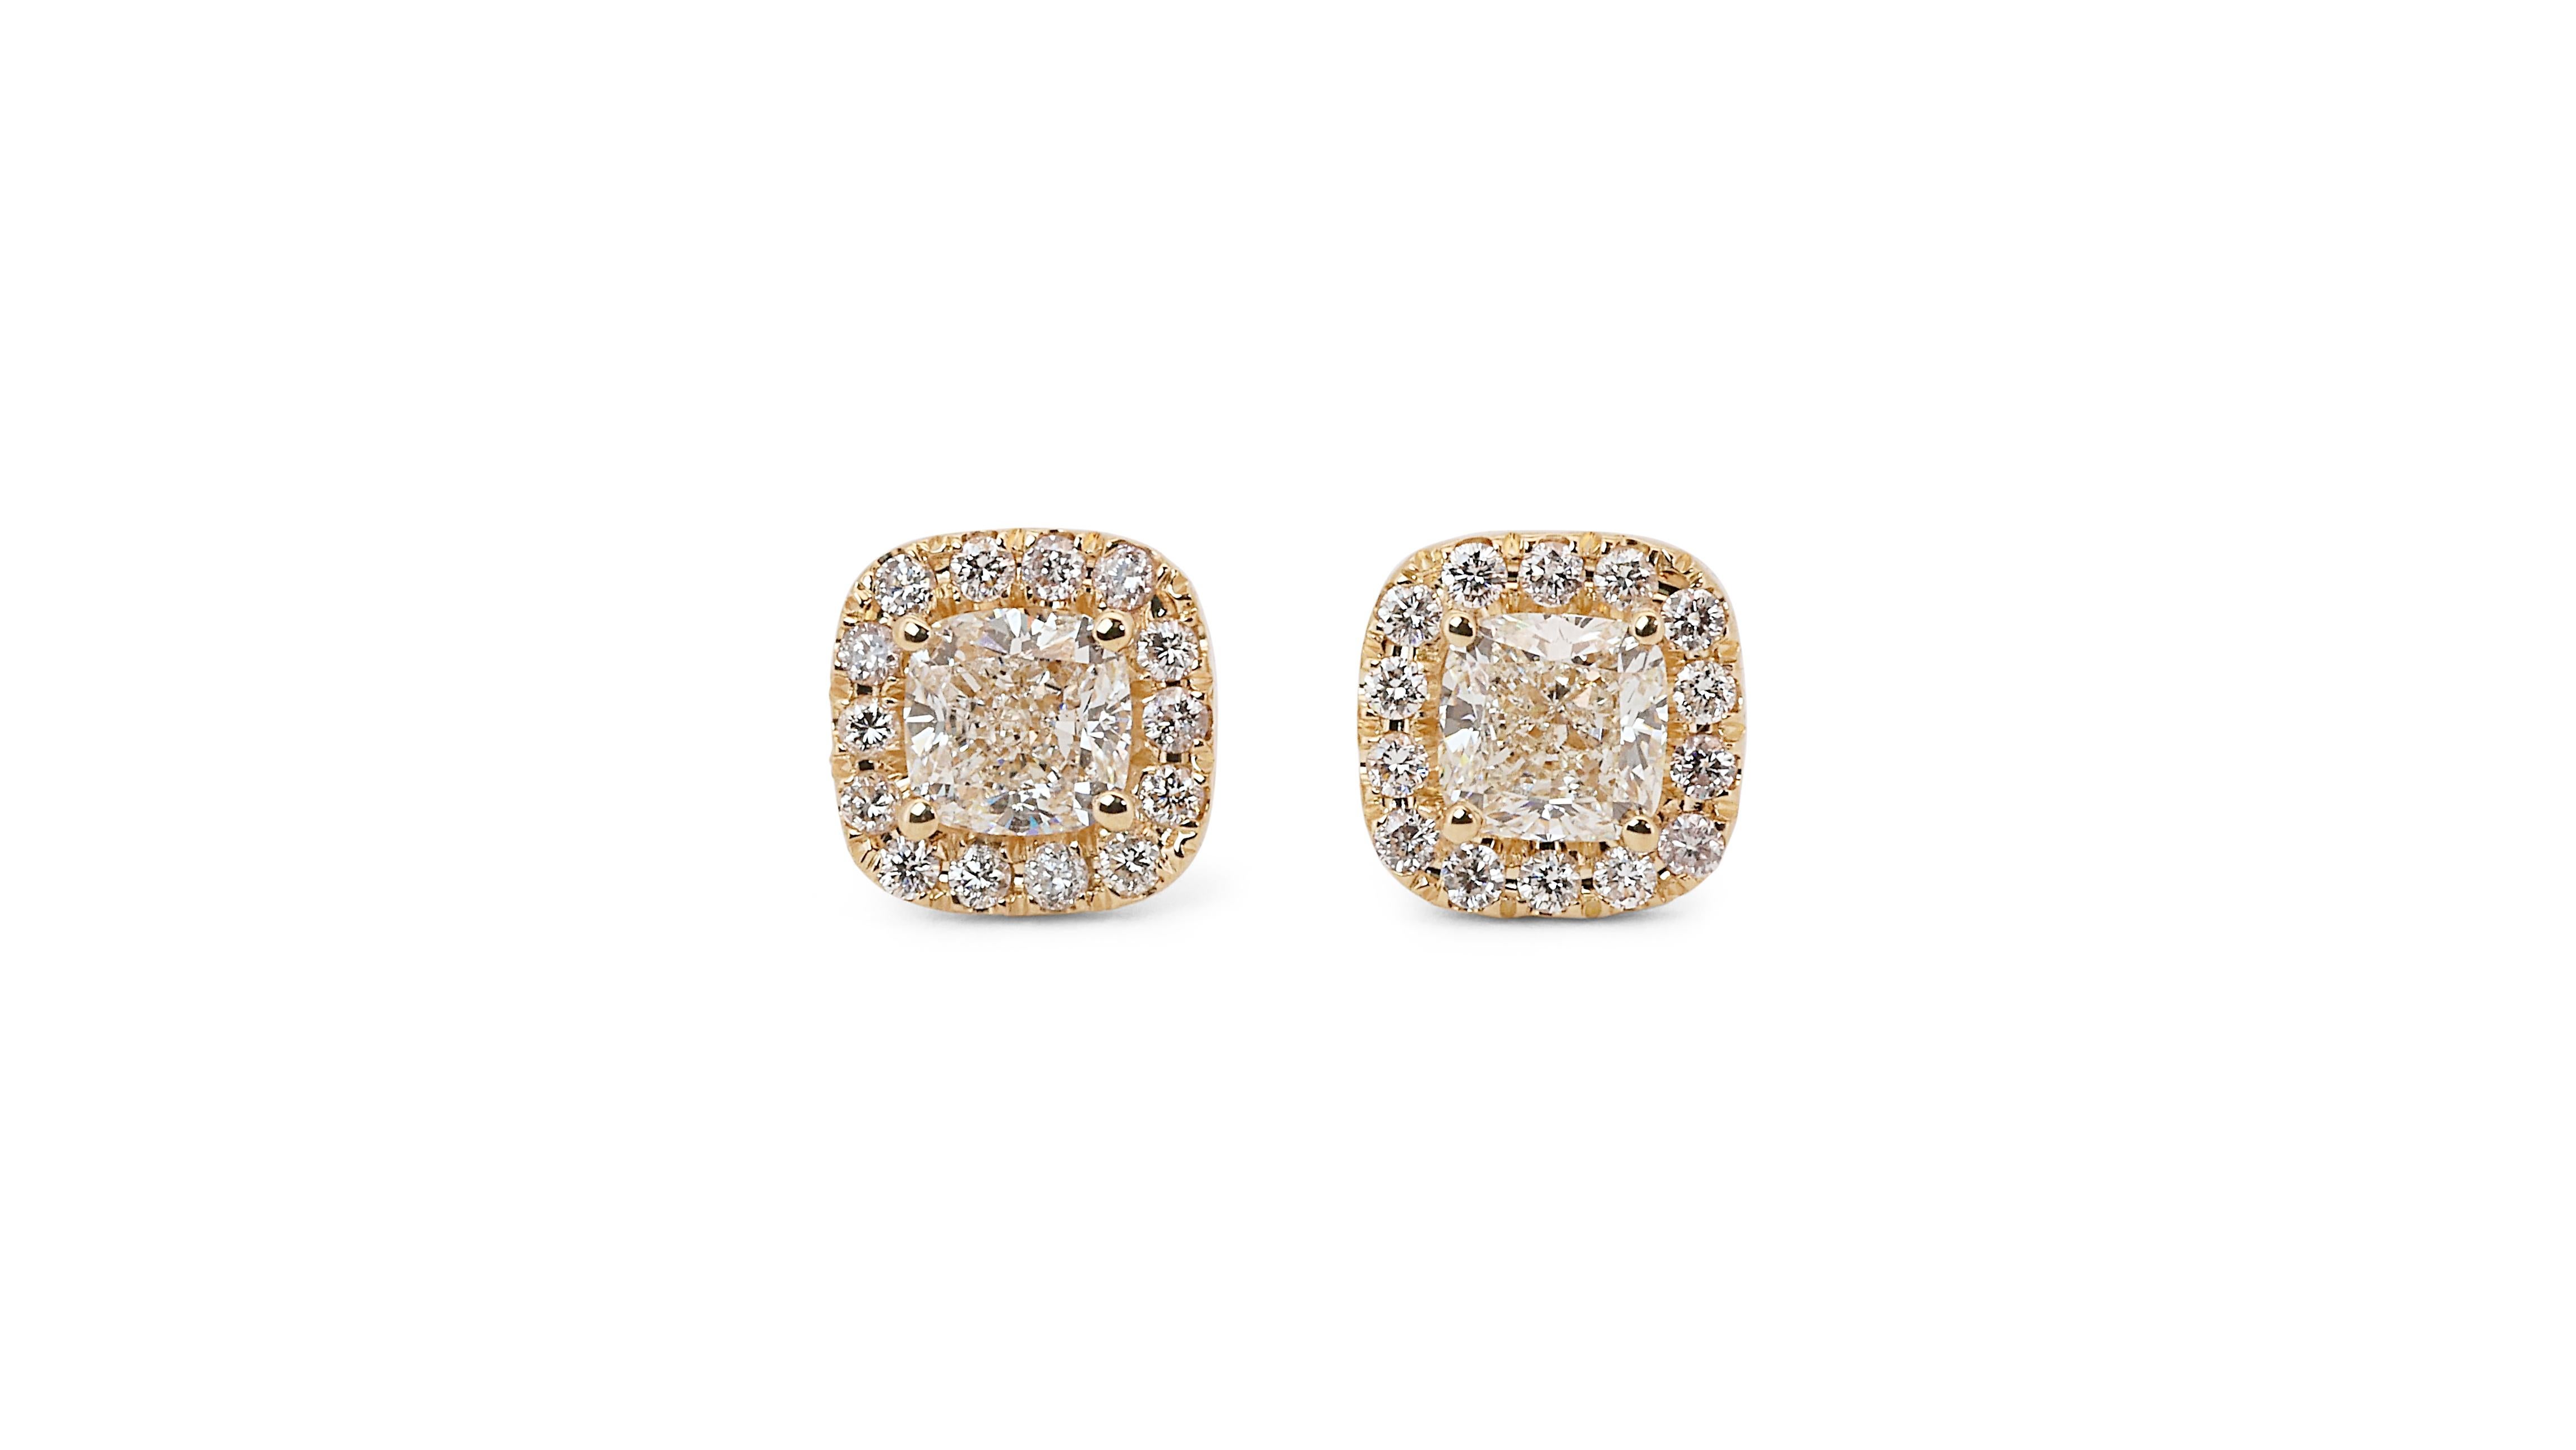 Radiant 14k Yellow Gold Natural Diamond Halo Stud Earrings w/2.57 ct - IGI Certified

These captivating halo stud earrings, crafted in gleaming 14k yellow gold showcase a dazzling display of diamonds. Each earring features a stunning square cushion